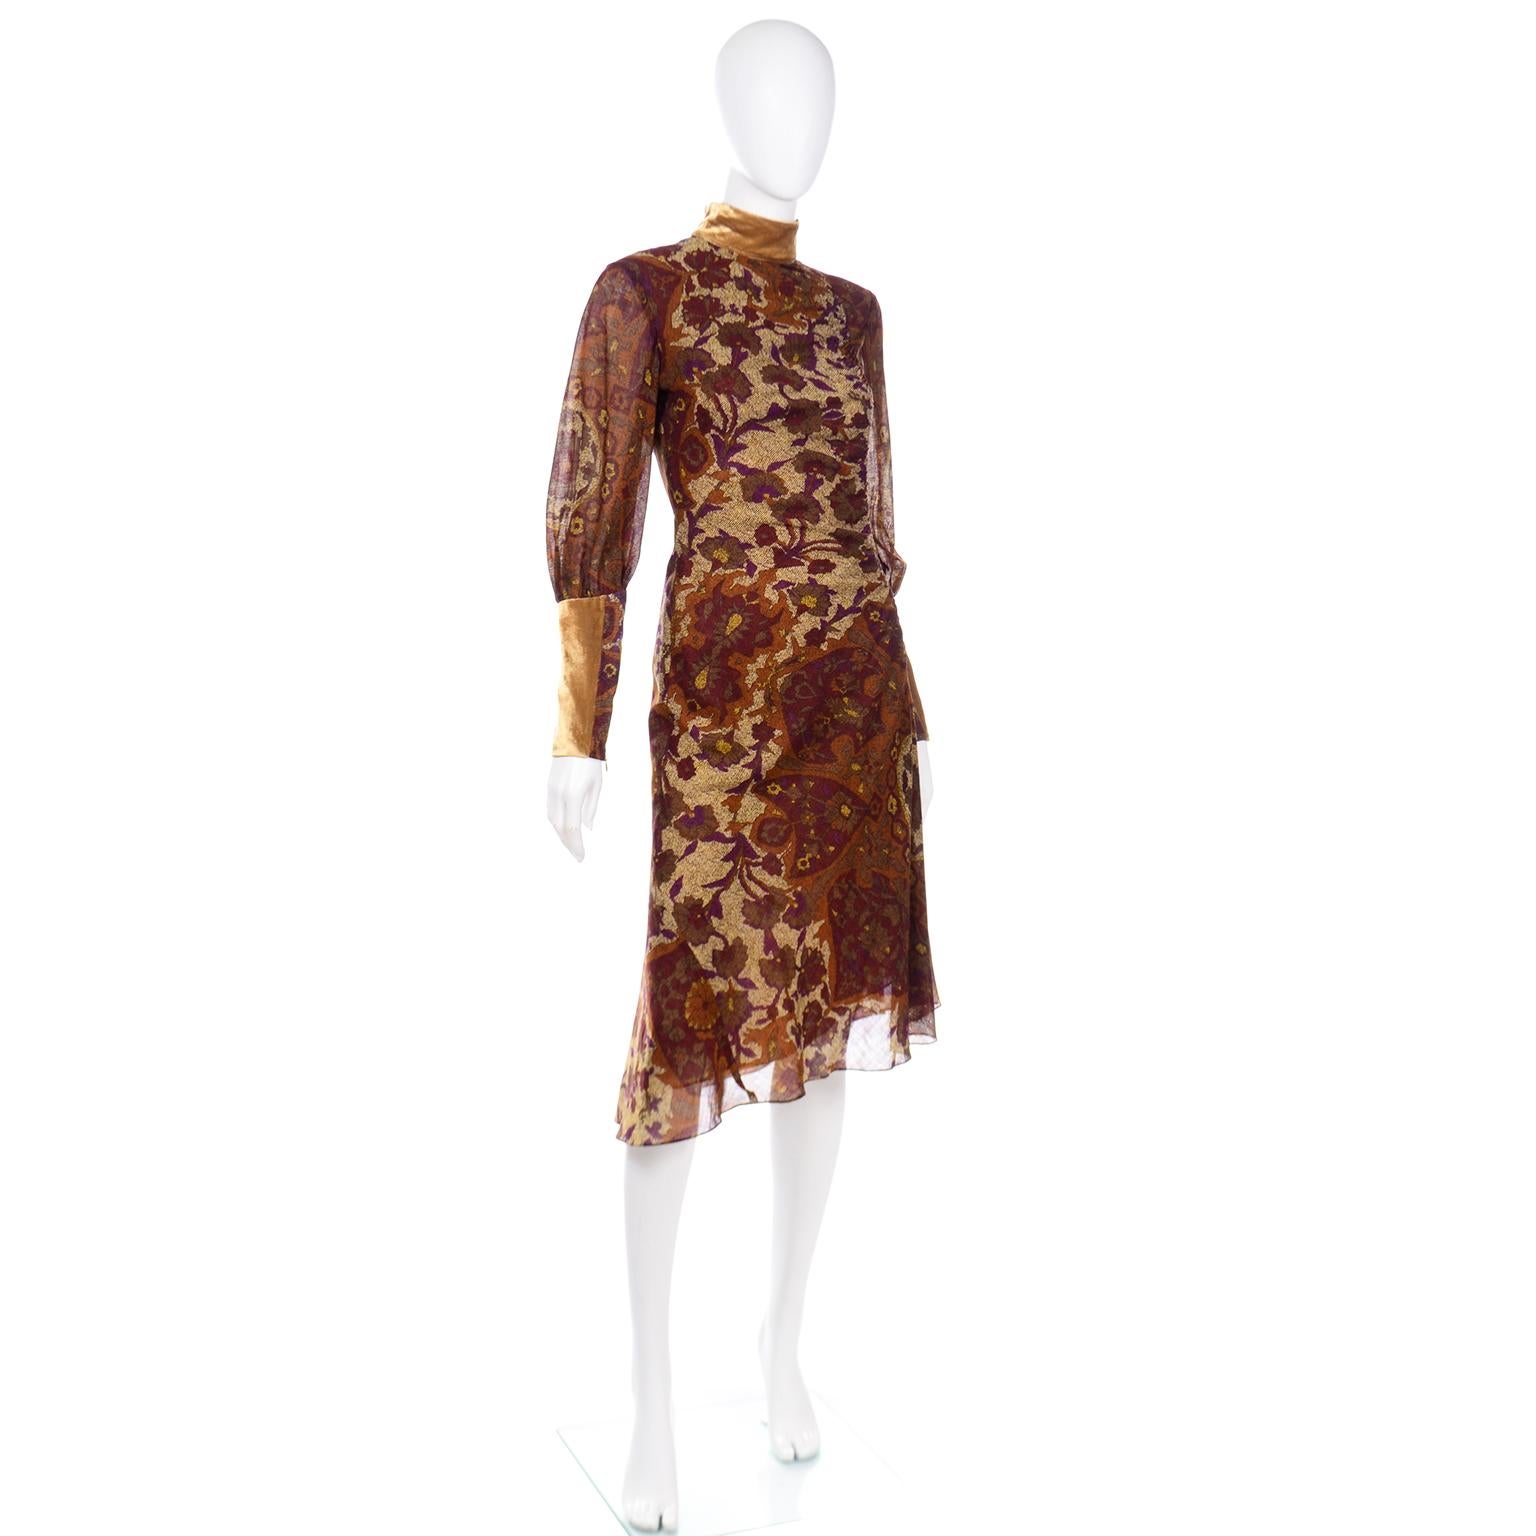 Women's Kenzo Vintage Lush Plum Brown and Gold Floral Print Dress w Gold Velvet Trim For Sale